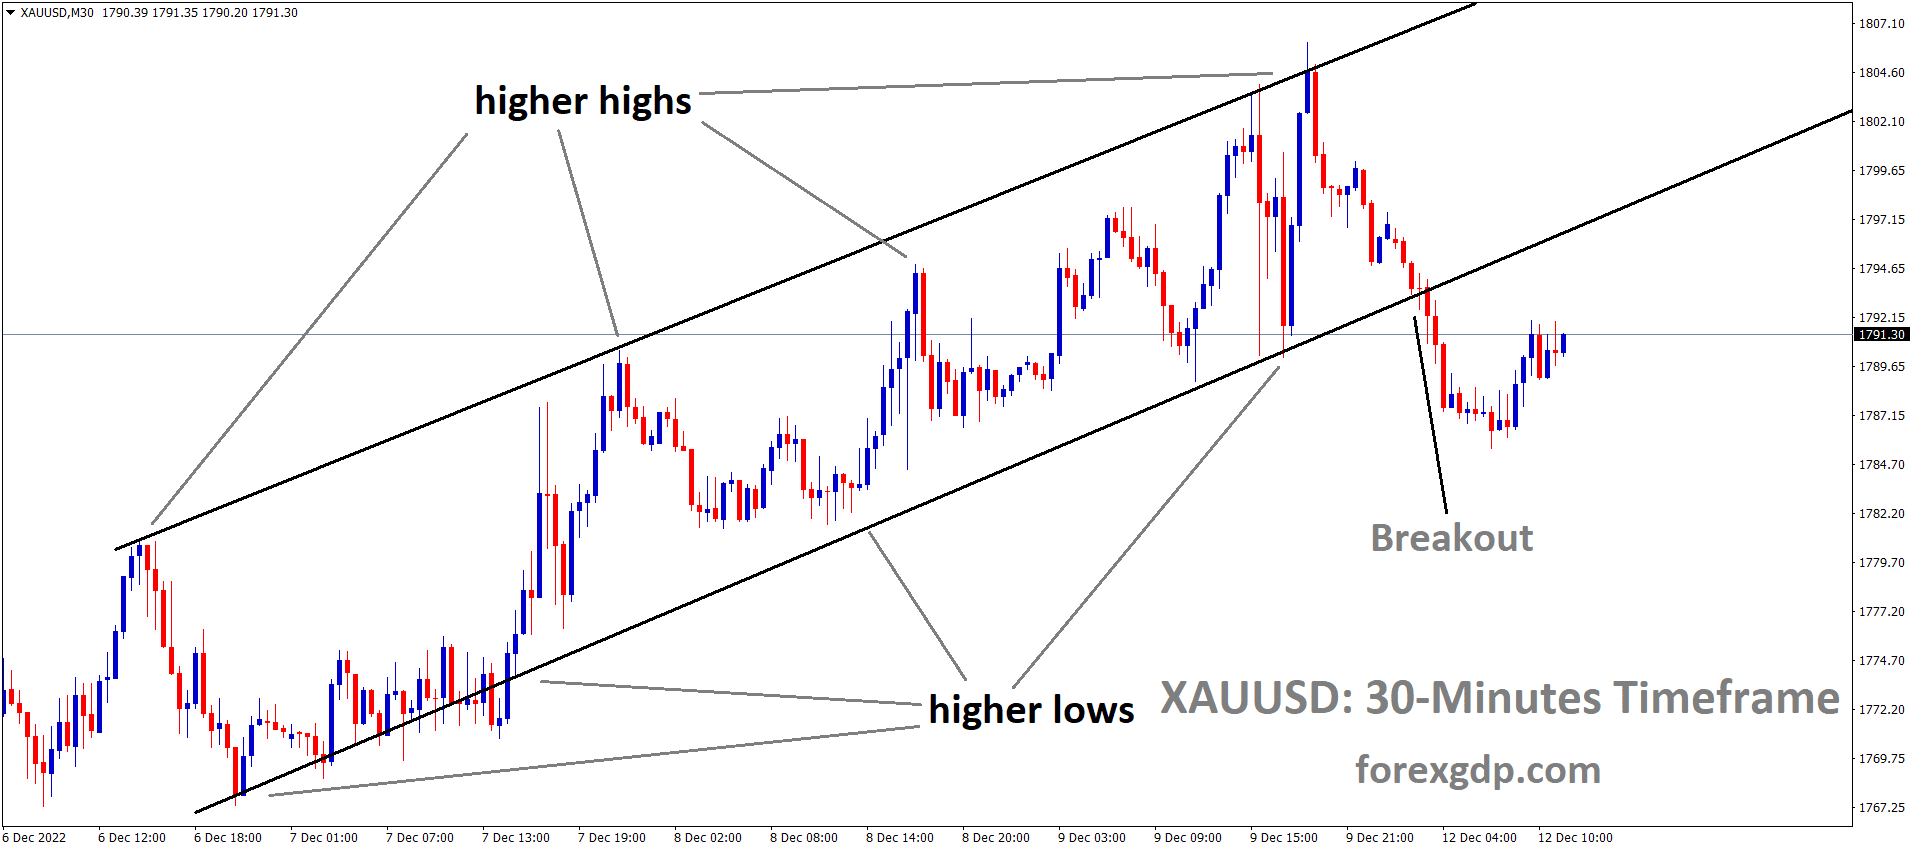 XAUUSD Gold price has broken the Ascending channel in downside.